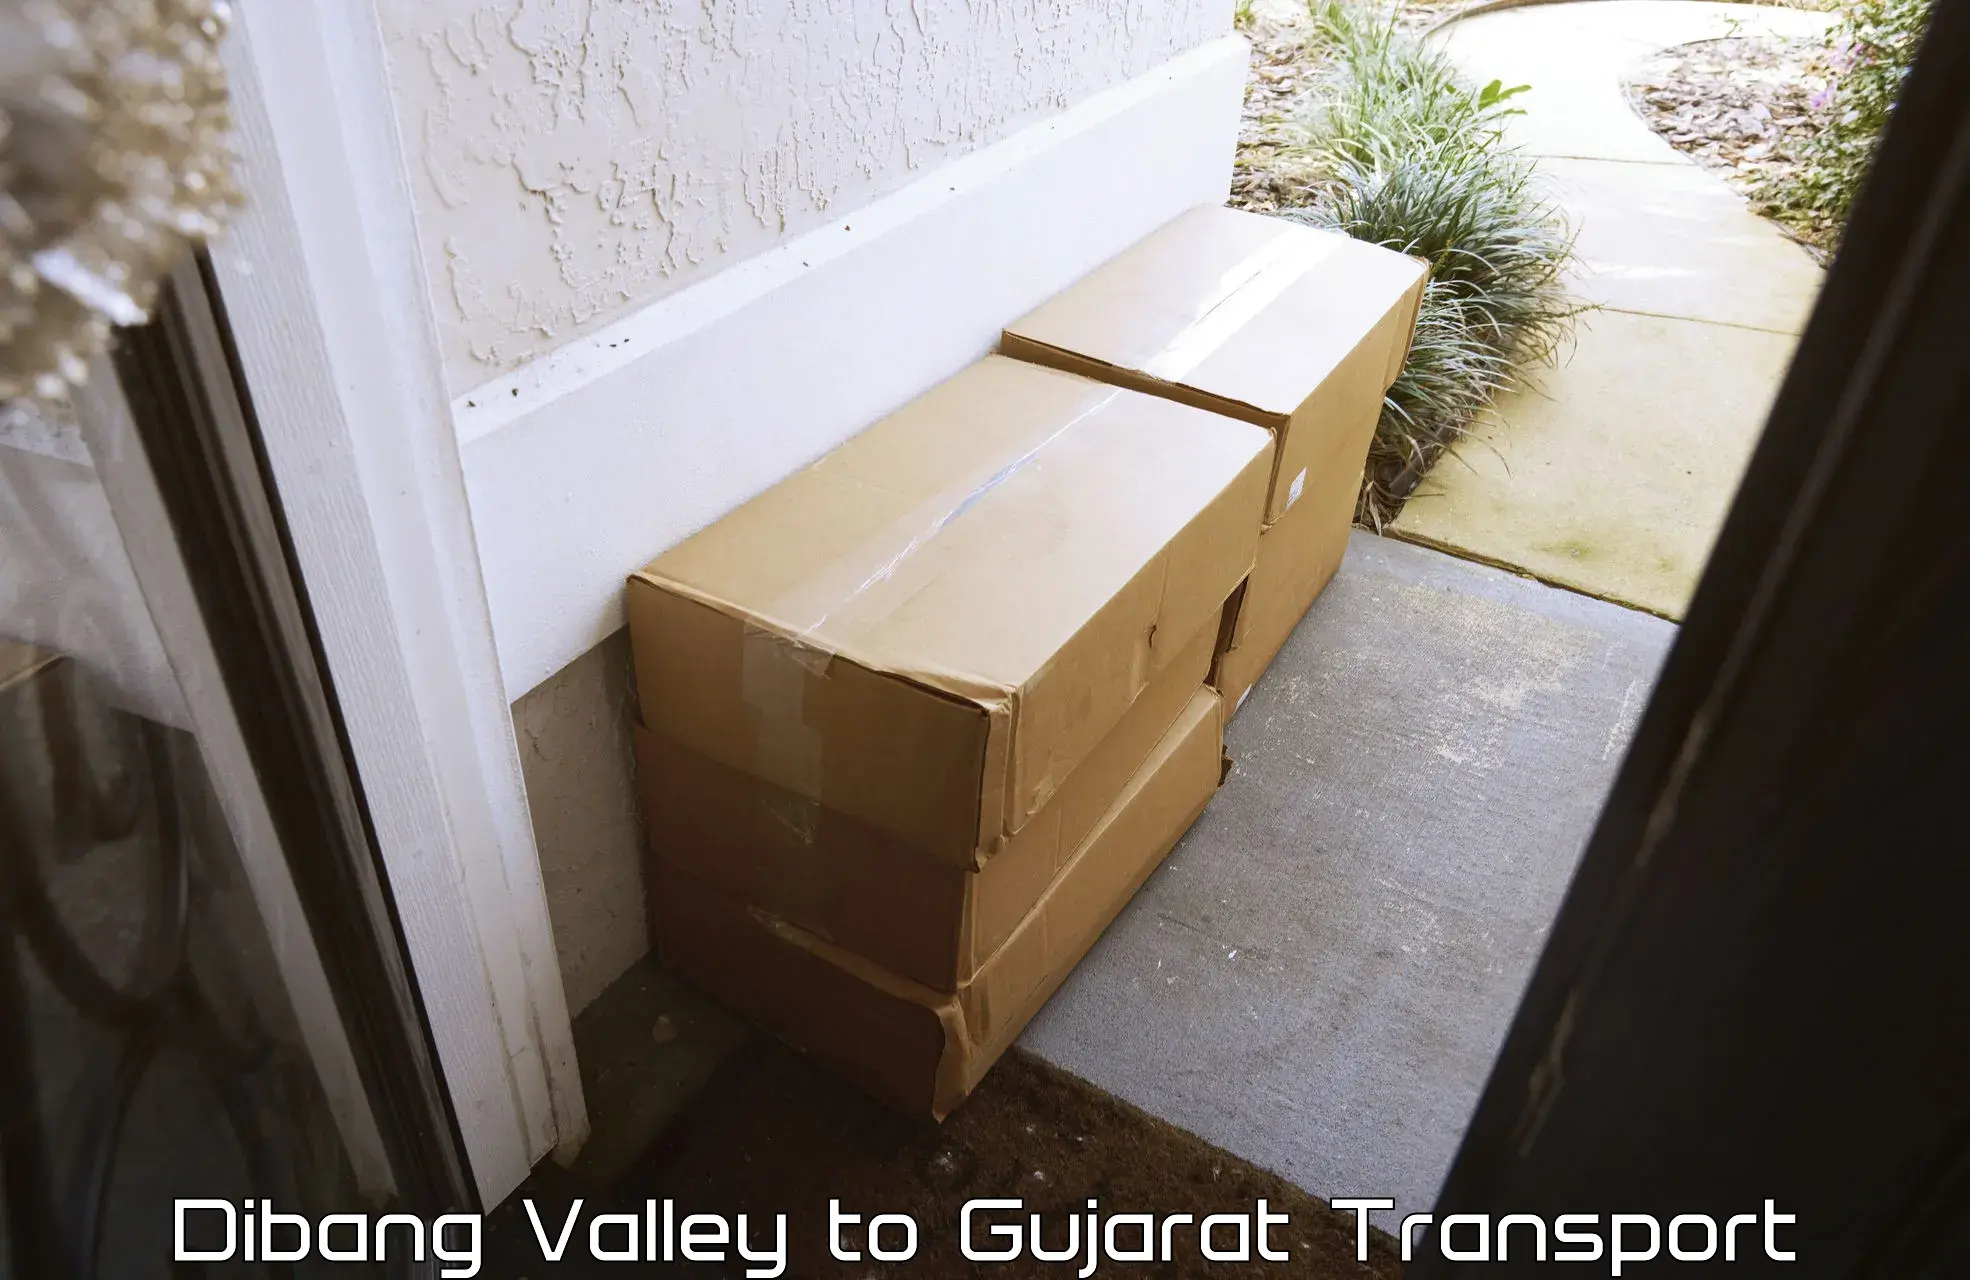 Goods delivery service Dibang Valley to Morbi